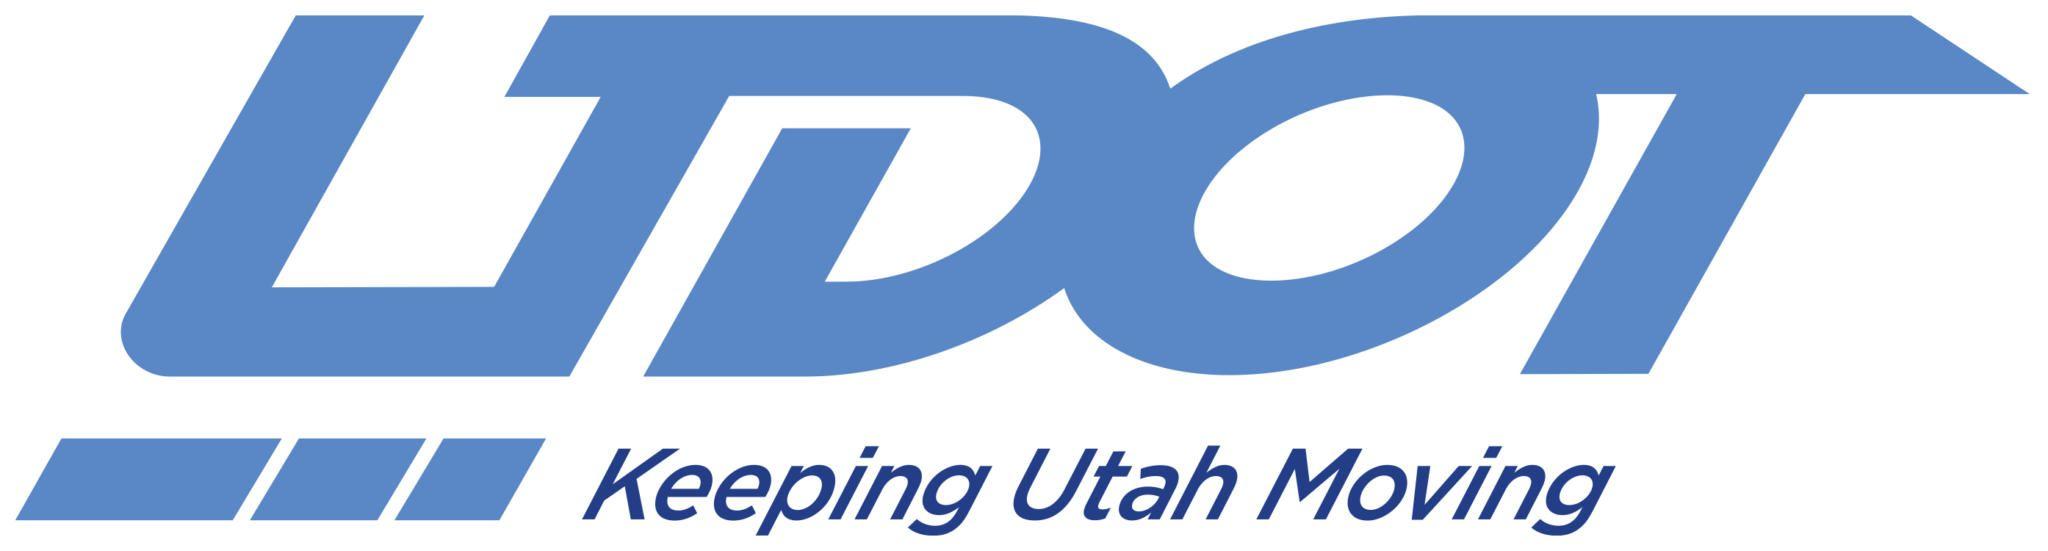 UDOT Logo - Vision and Mission announced at UDOT Annual Conference ...